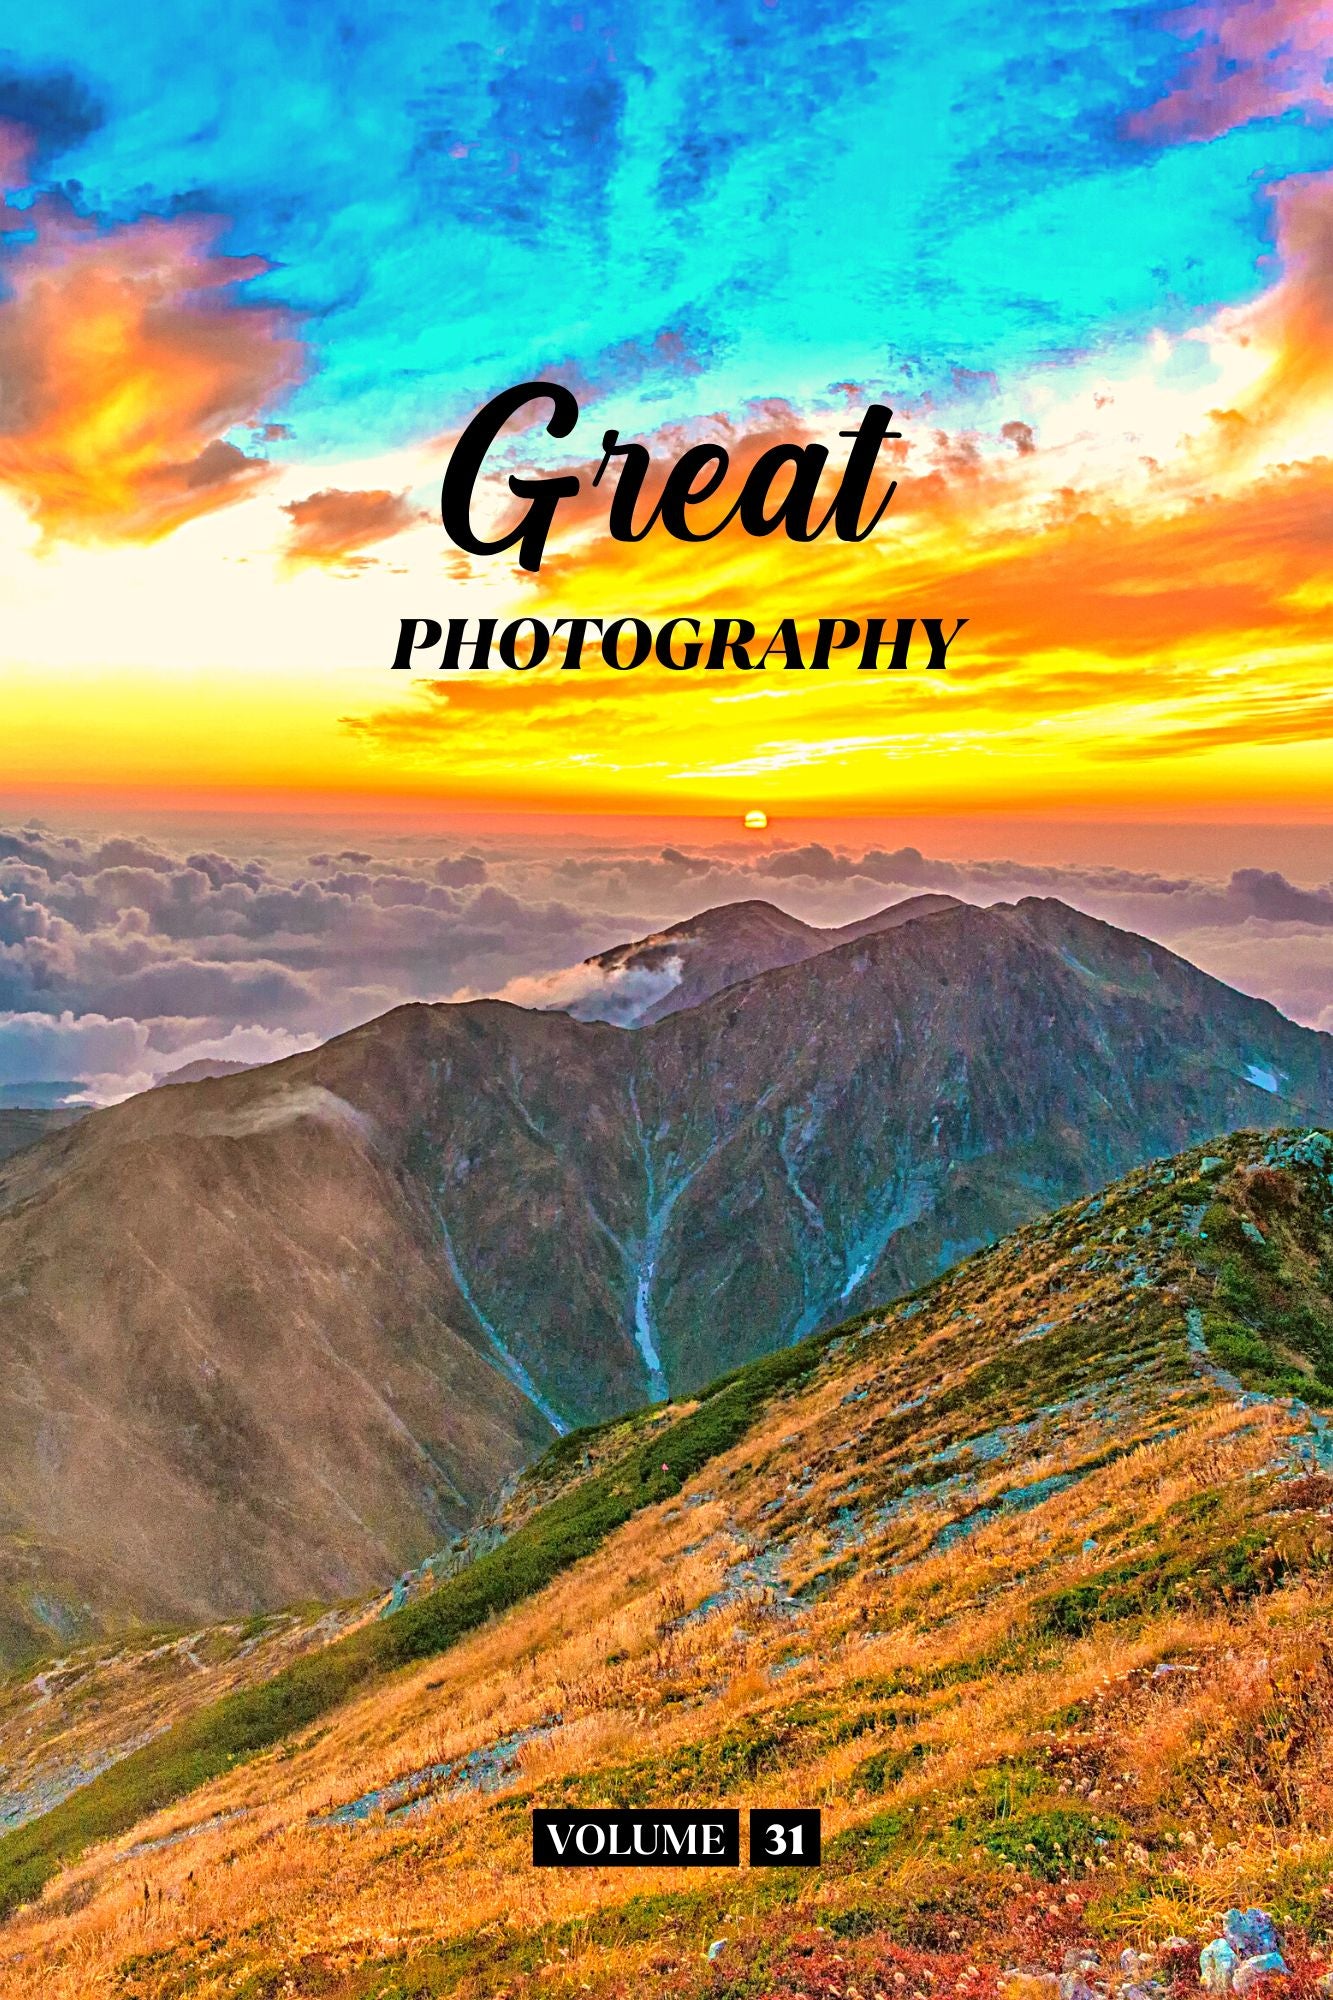 Great Photography Volume 31 (Physical Book Pre-Order)